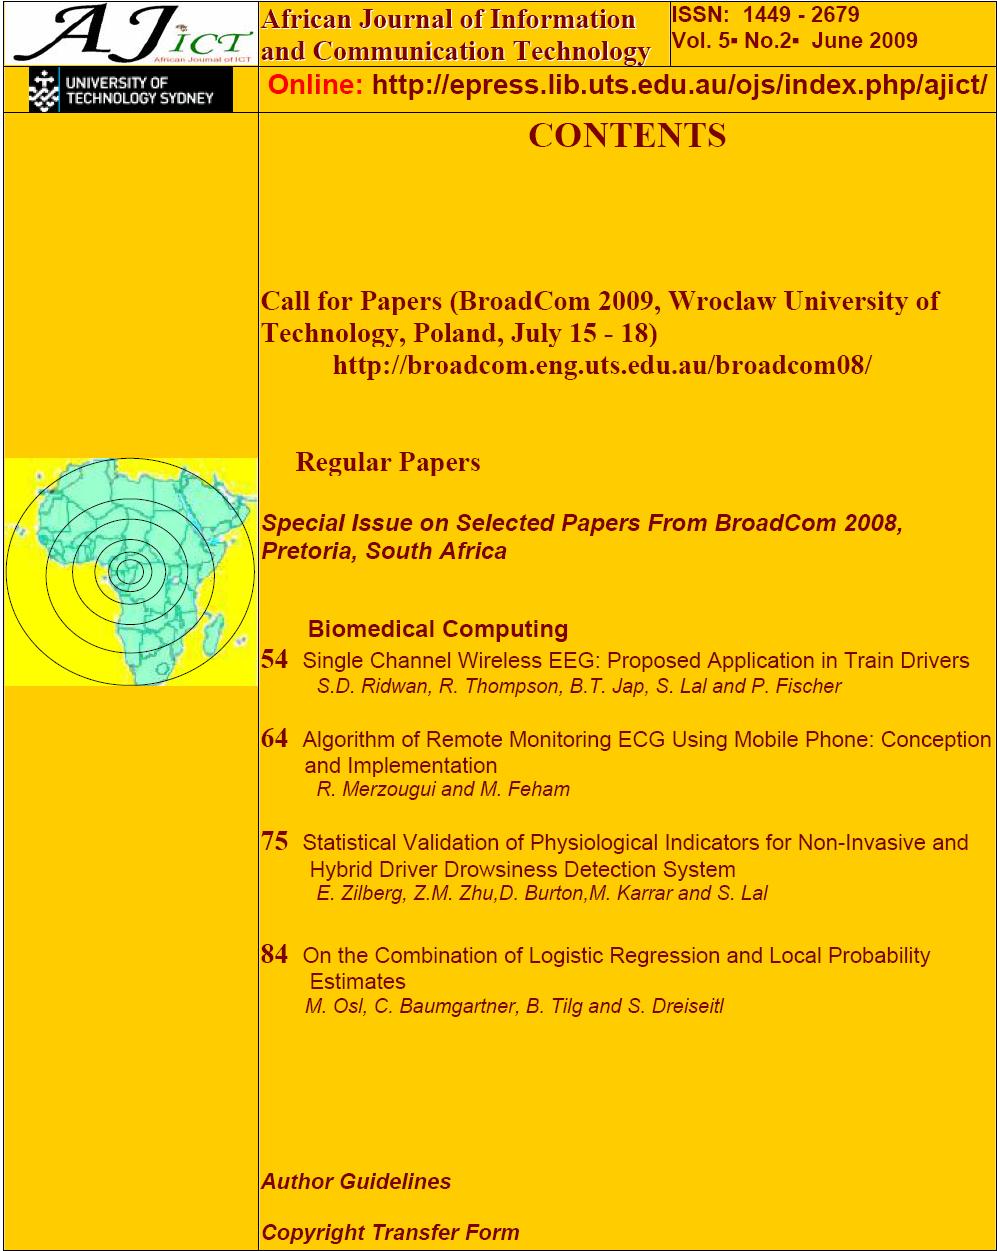 African Journal of Information & Communication Technology